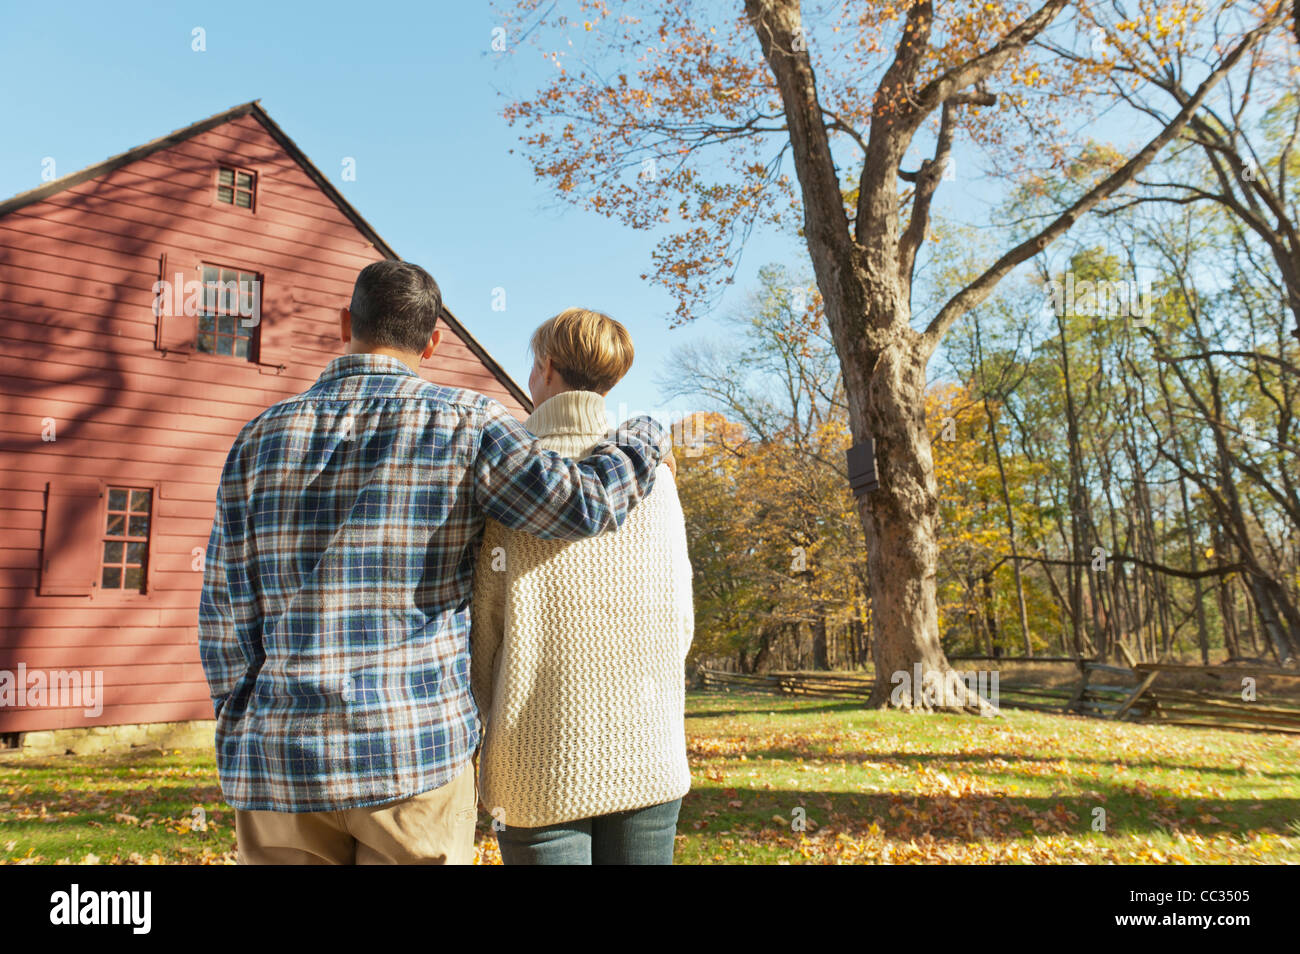 USA, New Jersey, Rear view of couple facing cottage house Stock Photo